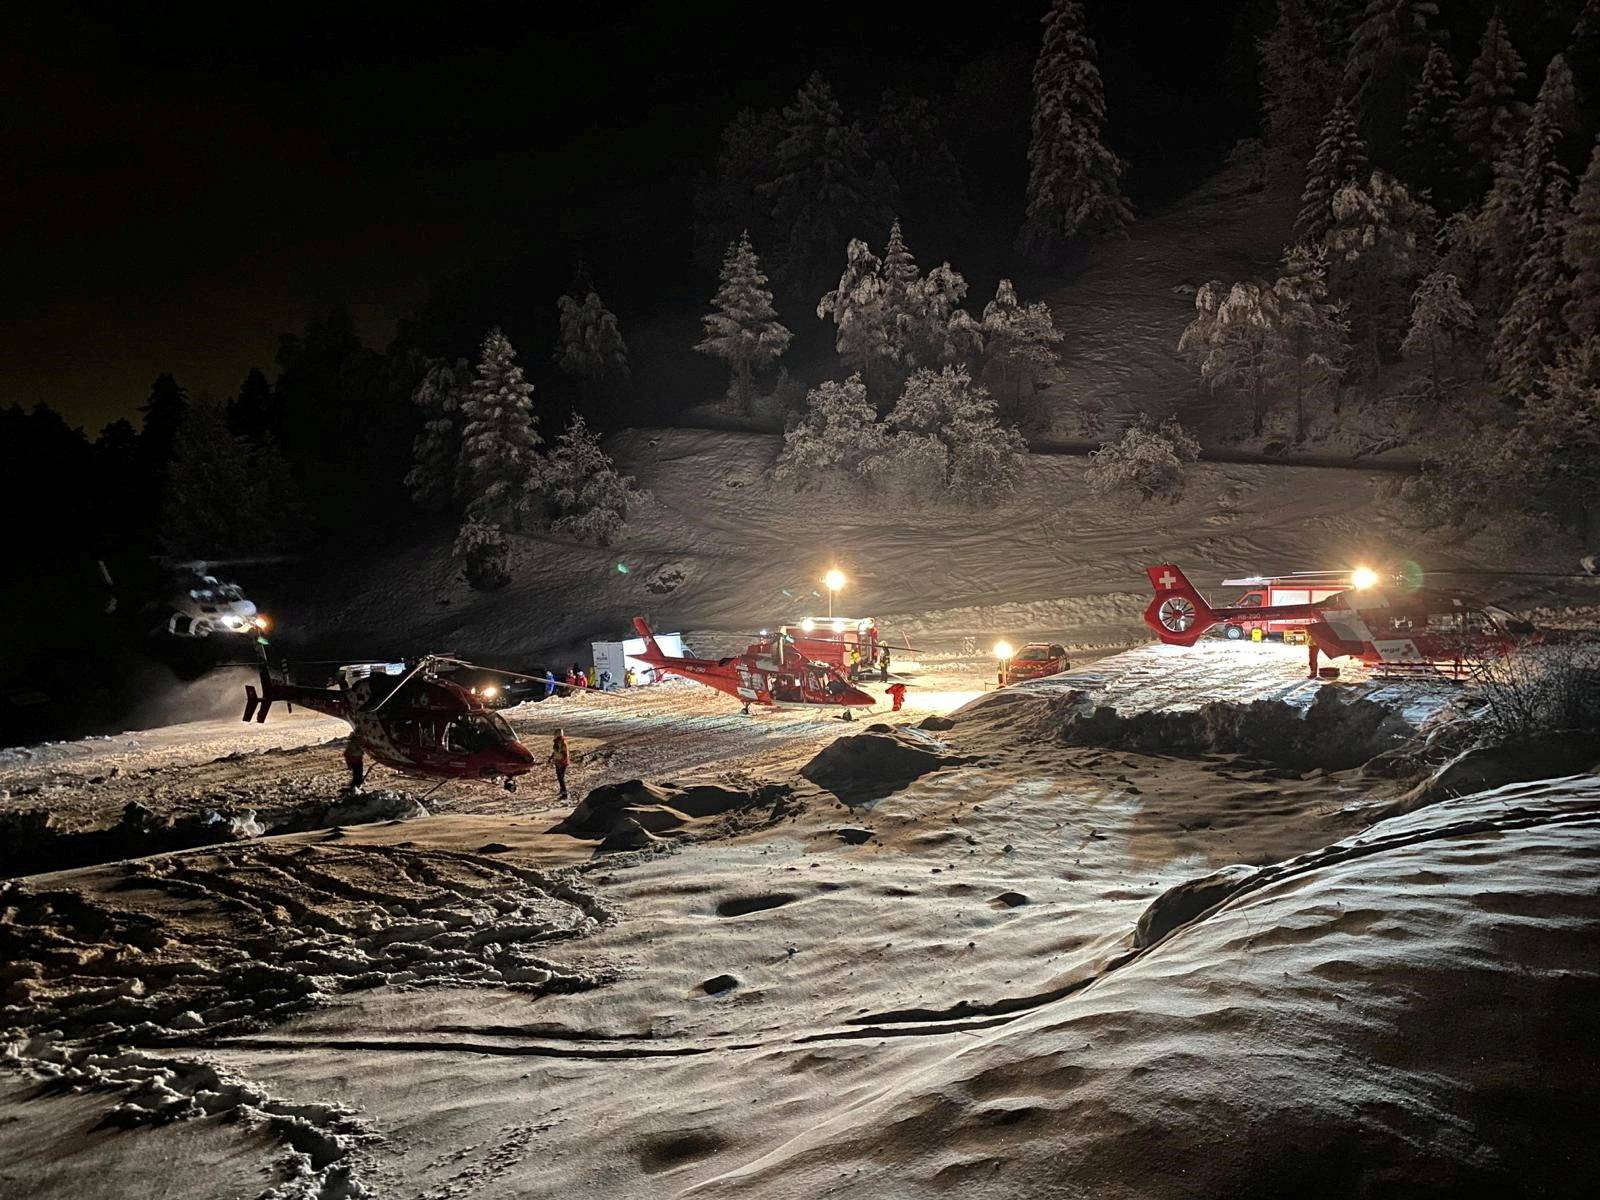 Rescue operation after six touring skiers went missing, in Evolene